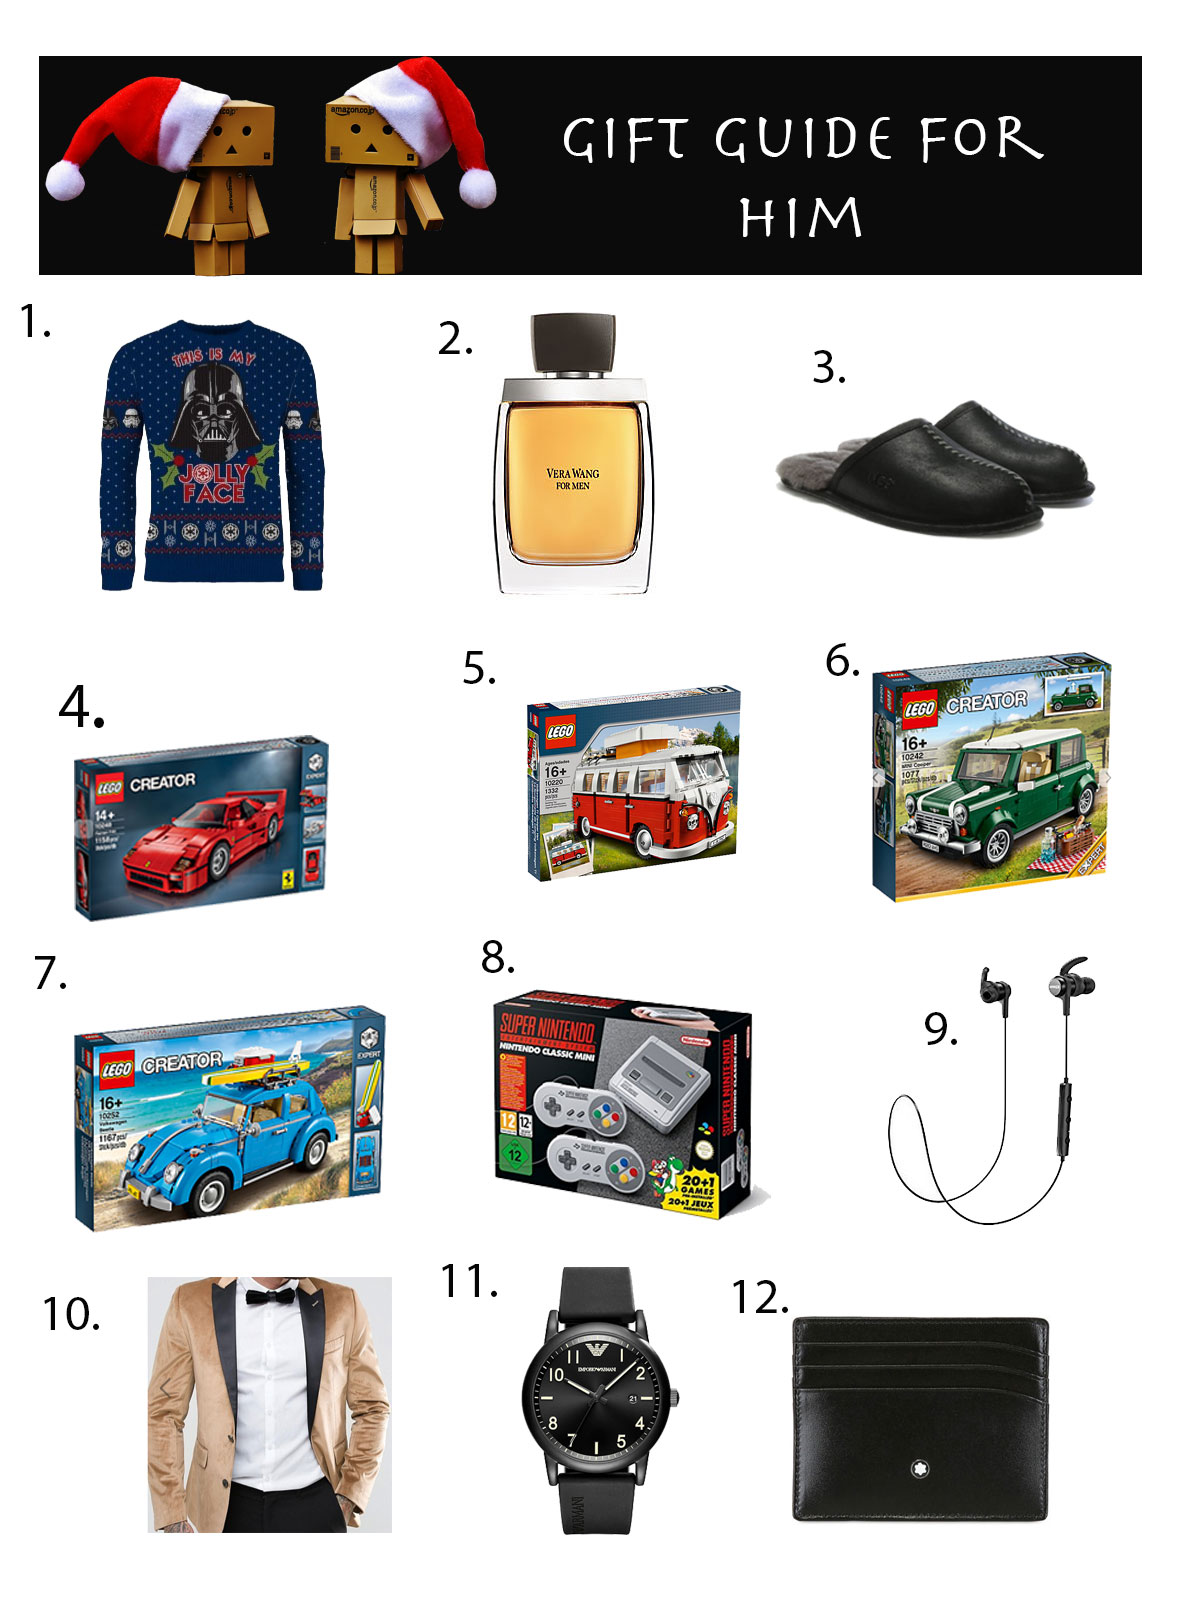 Holiday Gift guide for him - Christmas Gift Guide for Him - 2017